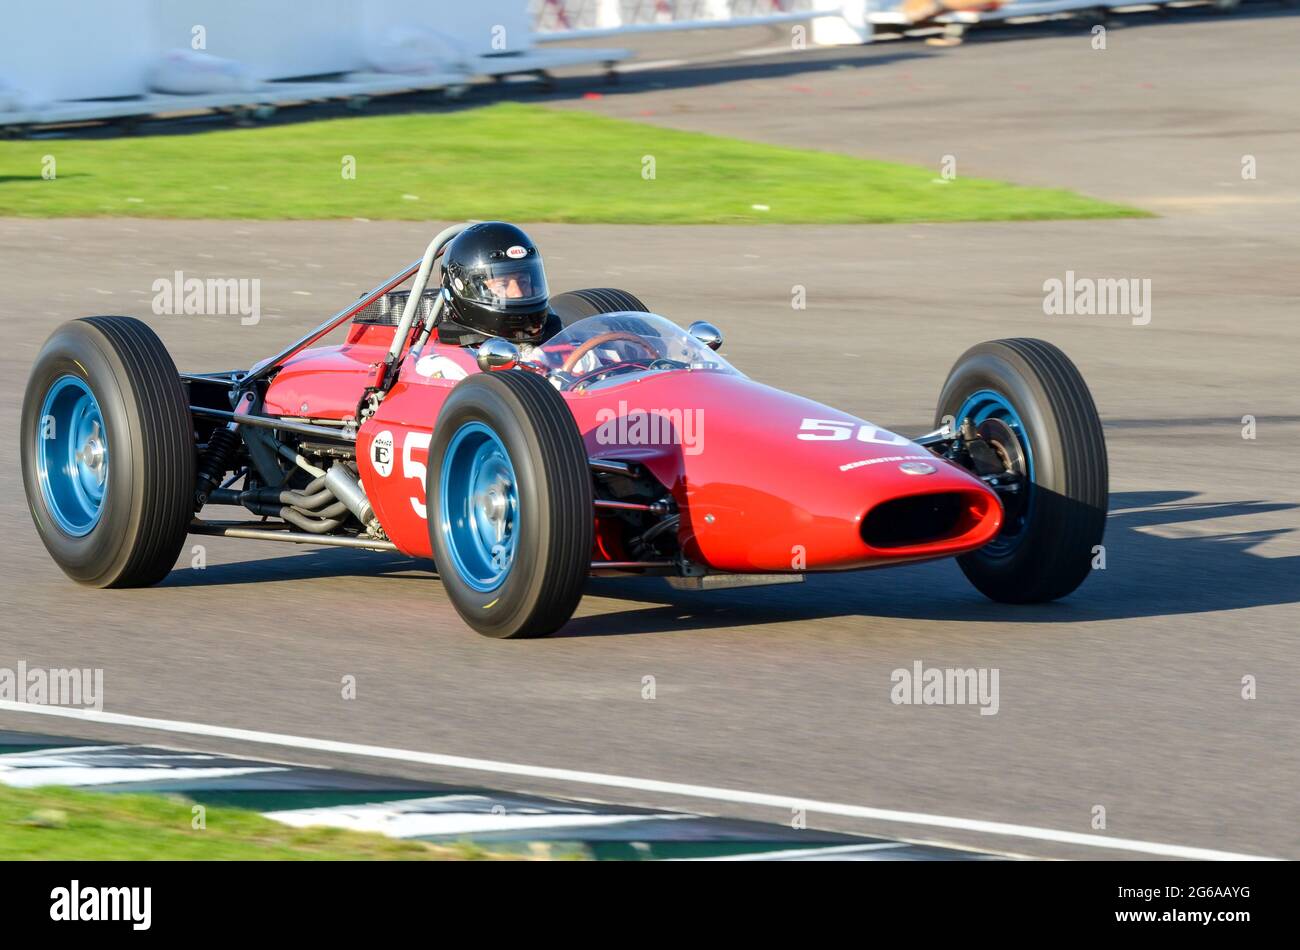 Derrington-Francis ATS GP Tipo 100 classic Grand Prix, vintage racing car competing in the Glover Trophy at the Goodwood Revival historic event, UK Stock Photo